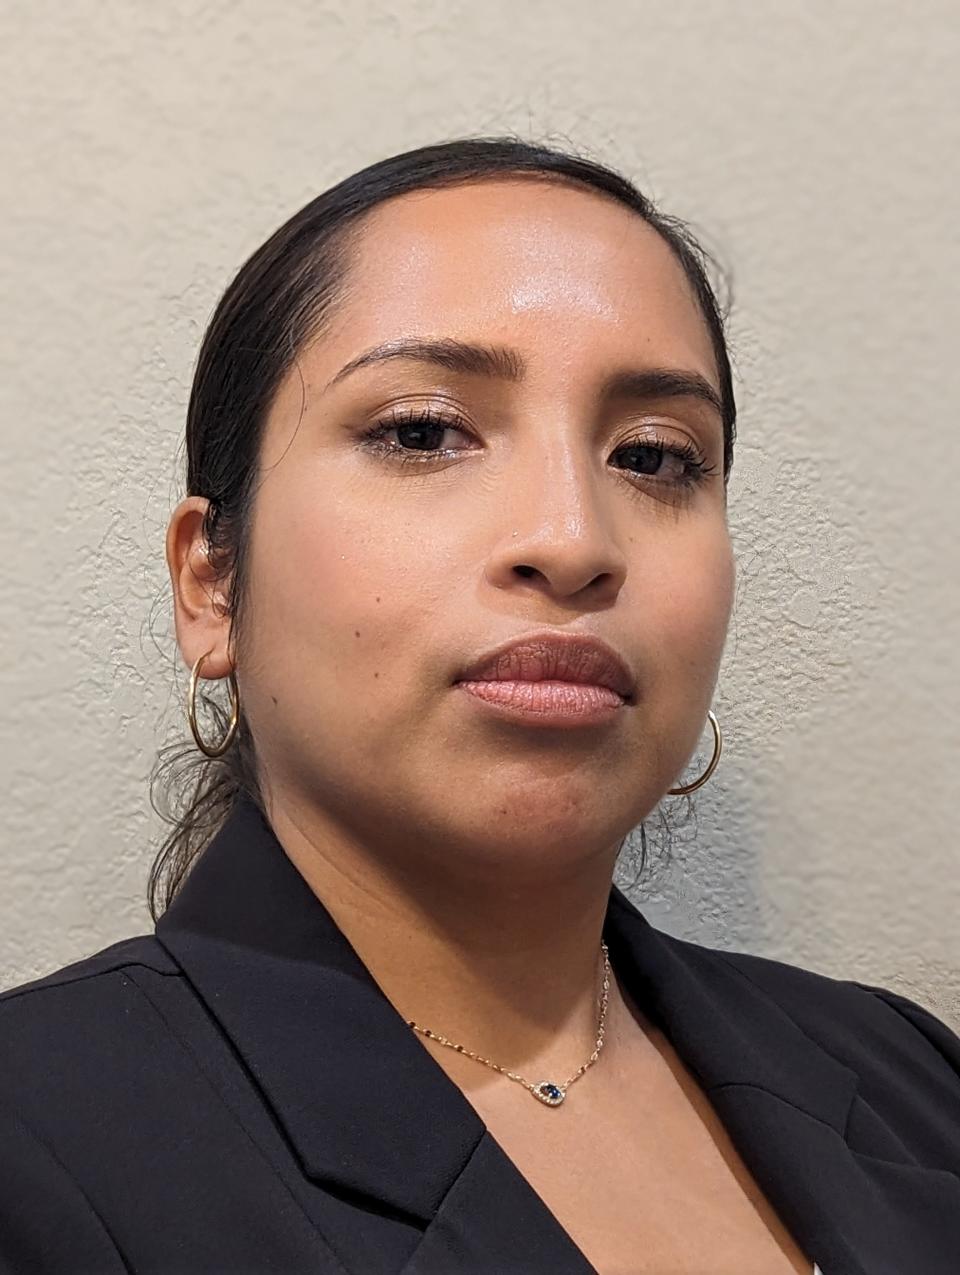 Jennefer Canales-Pelaez is a policy attorney and strategist for the Immigrant Legal Resource Center based in Houston.